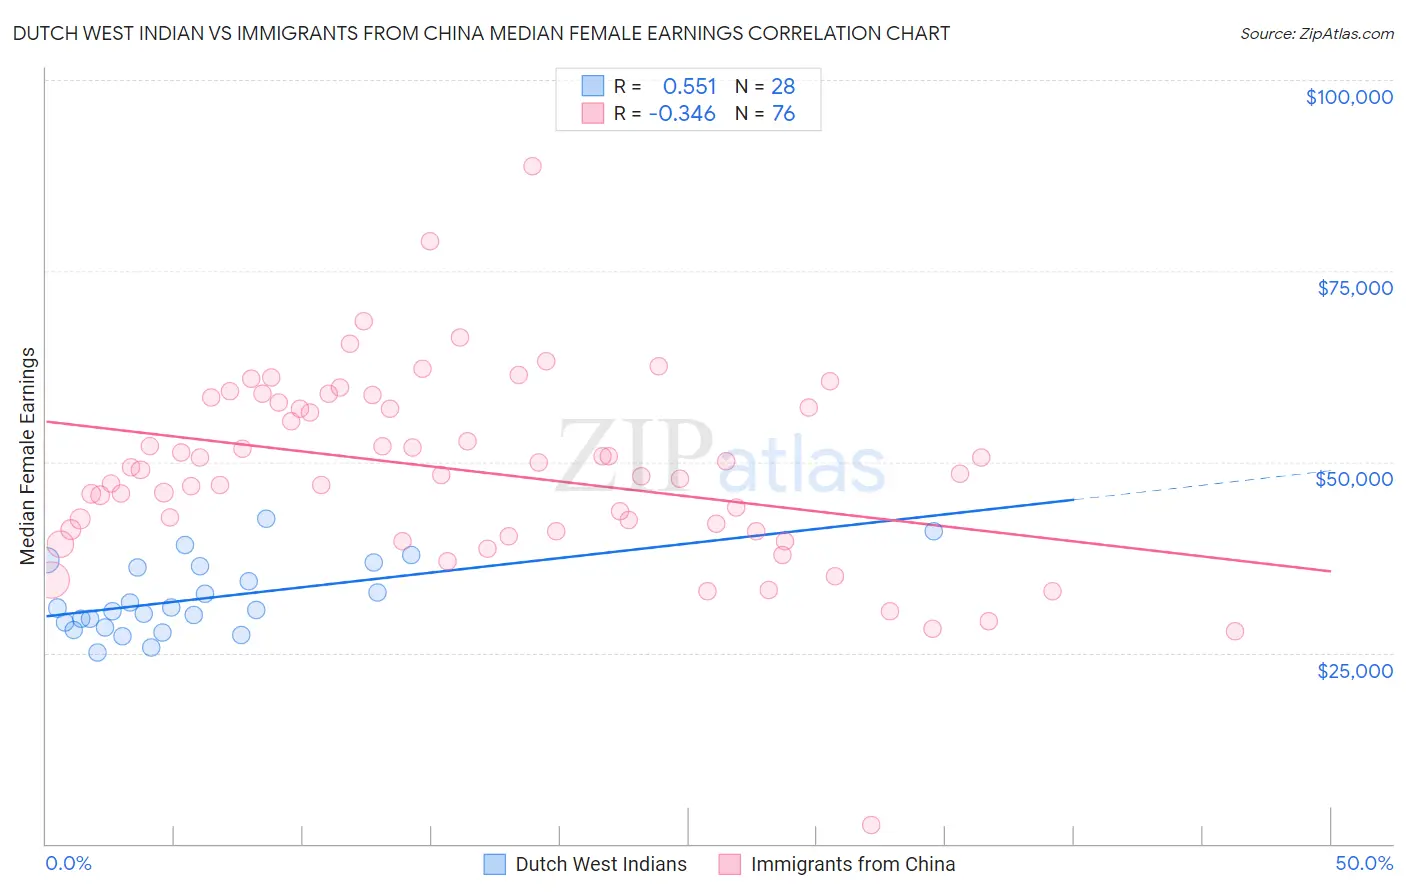 Dutch West Indian vs Immigrants from China Median Female Earnings